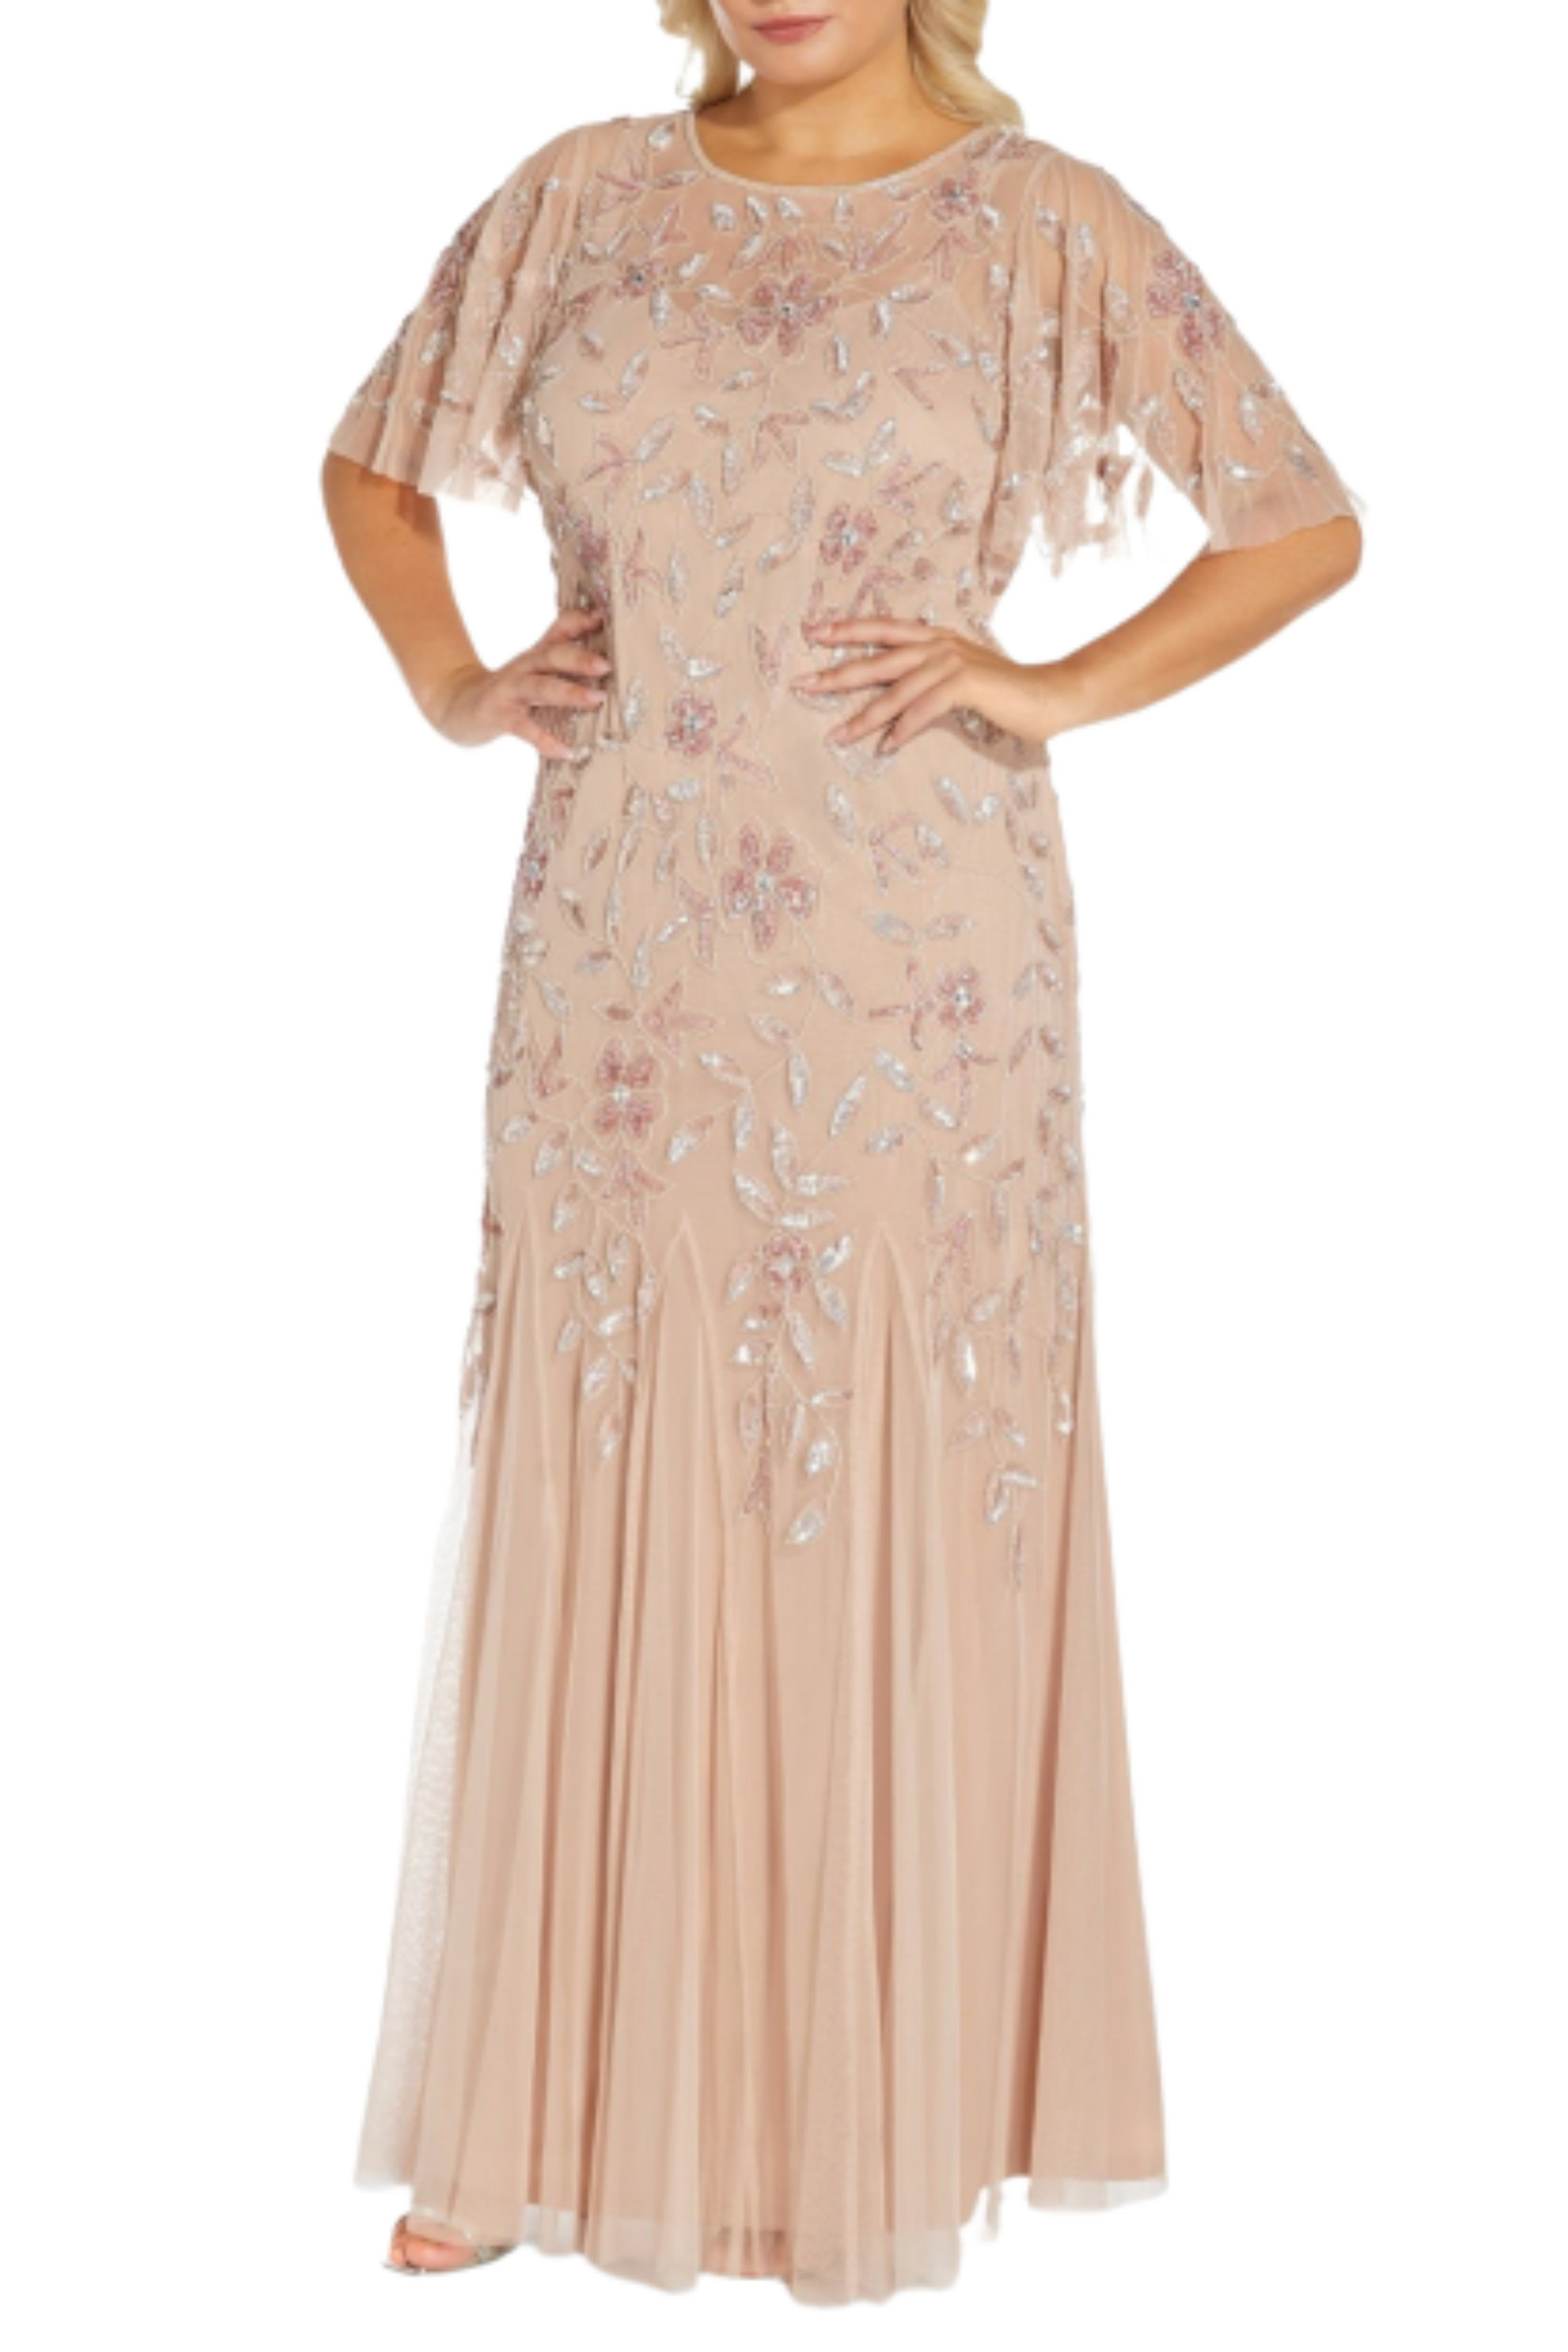 Adrianna Papell Floral Beaded Gown - Blush